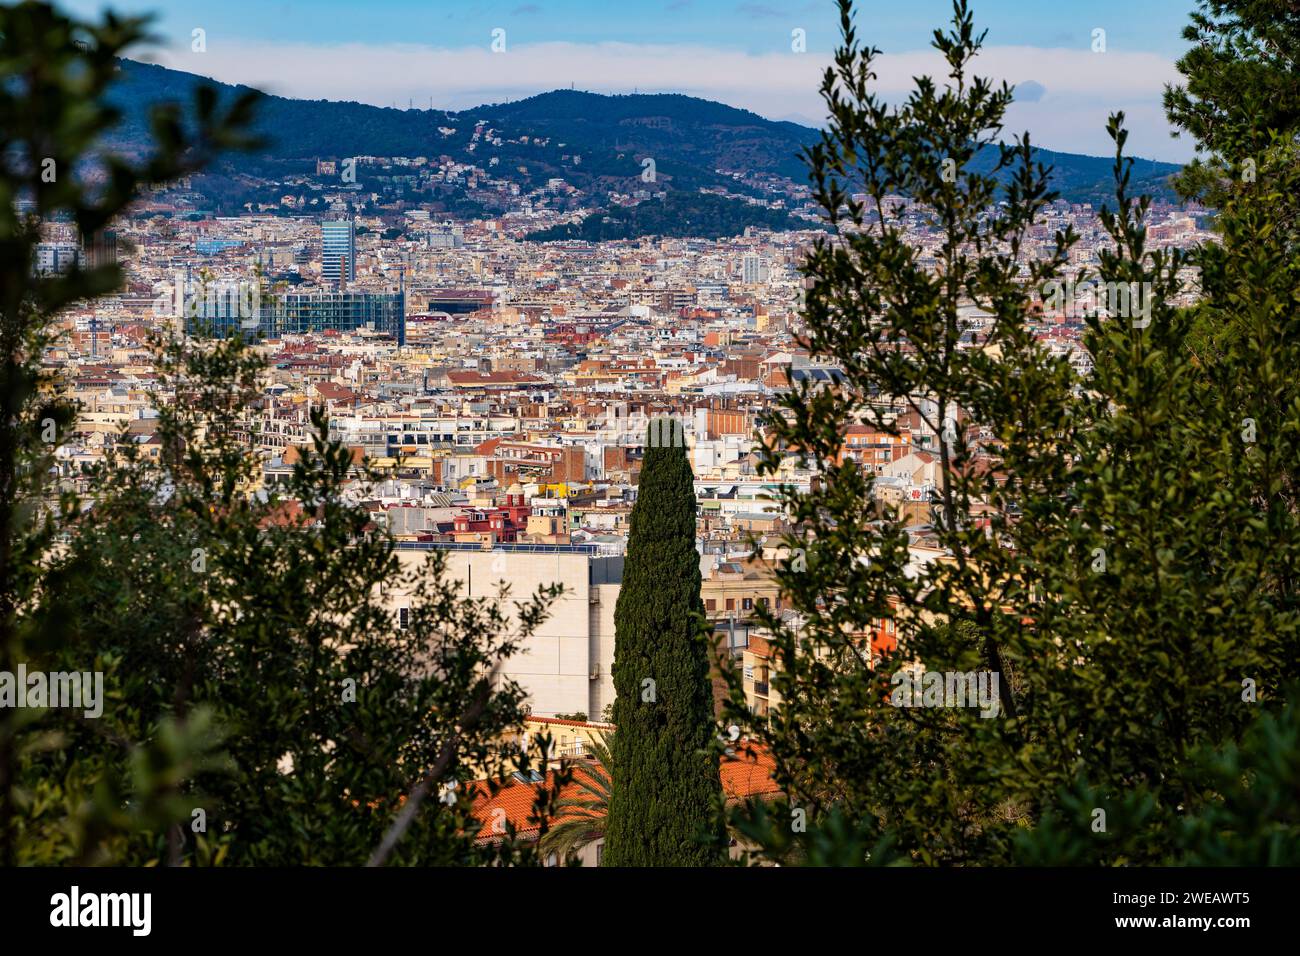 View of Barcelona from Montjuic. Barcelona is one of the densest cities in Europe, with high levels of car use. Stock Photo